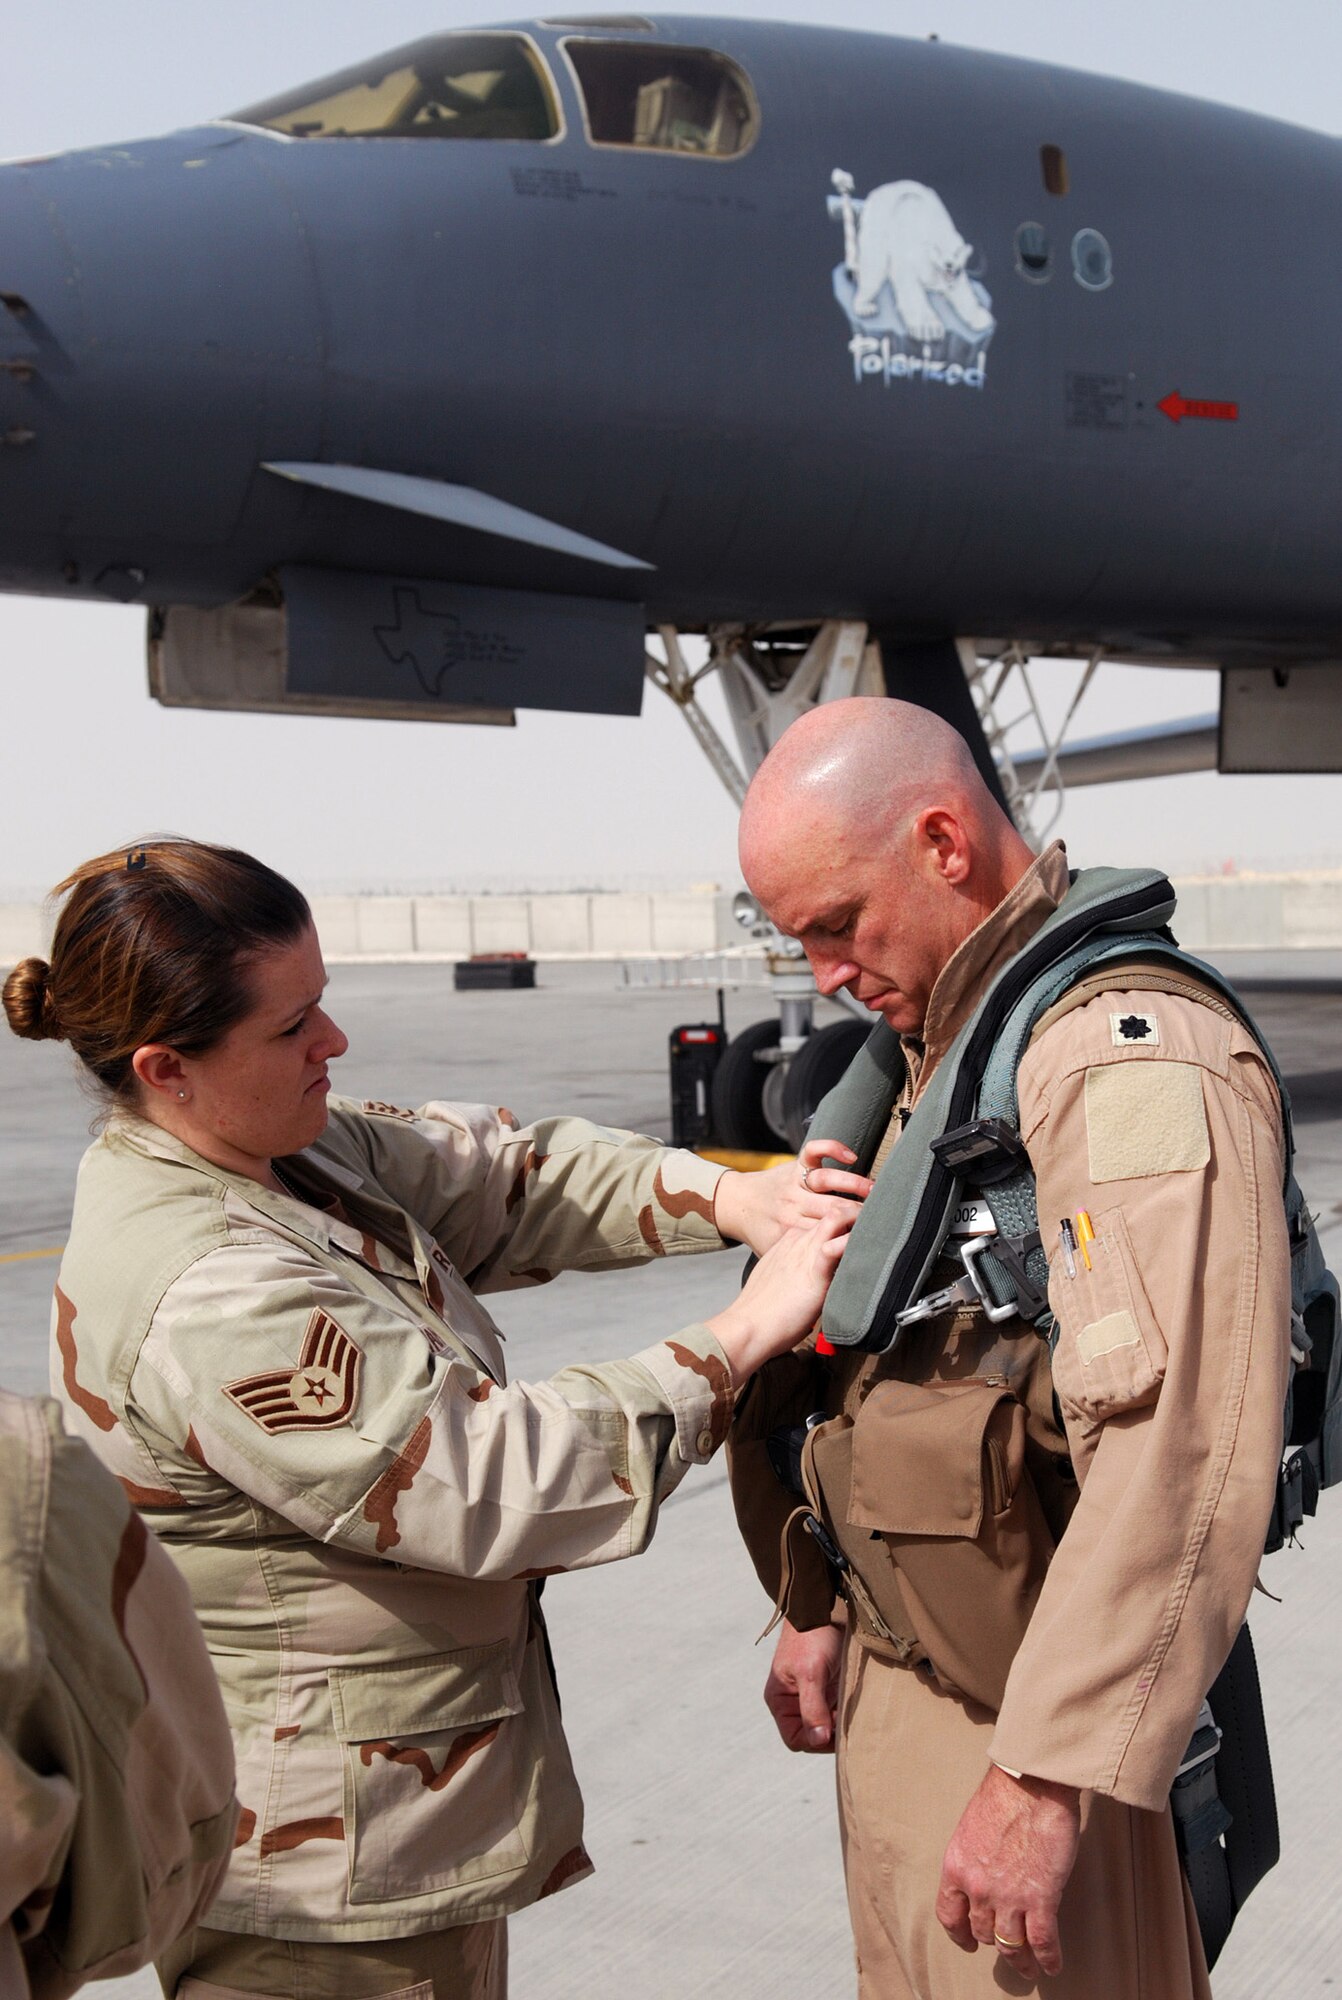 SOUTHWEST ASIA - Staff Sgt. Laura Latham, 379th Air Expeditionary Wing Public Affairs, 'mikes' LT. Col. Michael Eliason in preparation for a video tape interview at a Southwest Asia air base Jan. 10. Colonel Eliason, 9th Expeditionary Bomb Squadron commander, has just returned from a two-ship B-1B Lancer strike in Iraq in support of the U.S. Army. (U. S. Air Force photo/Staff Sgt. Douglas Olsen)